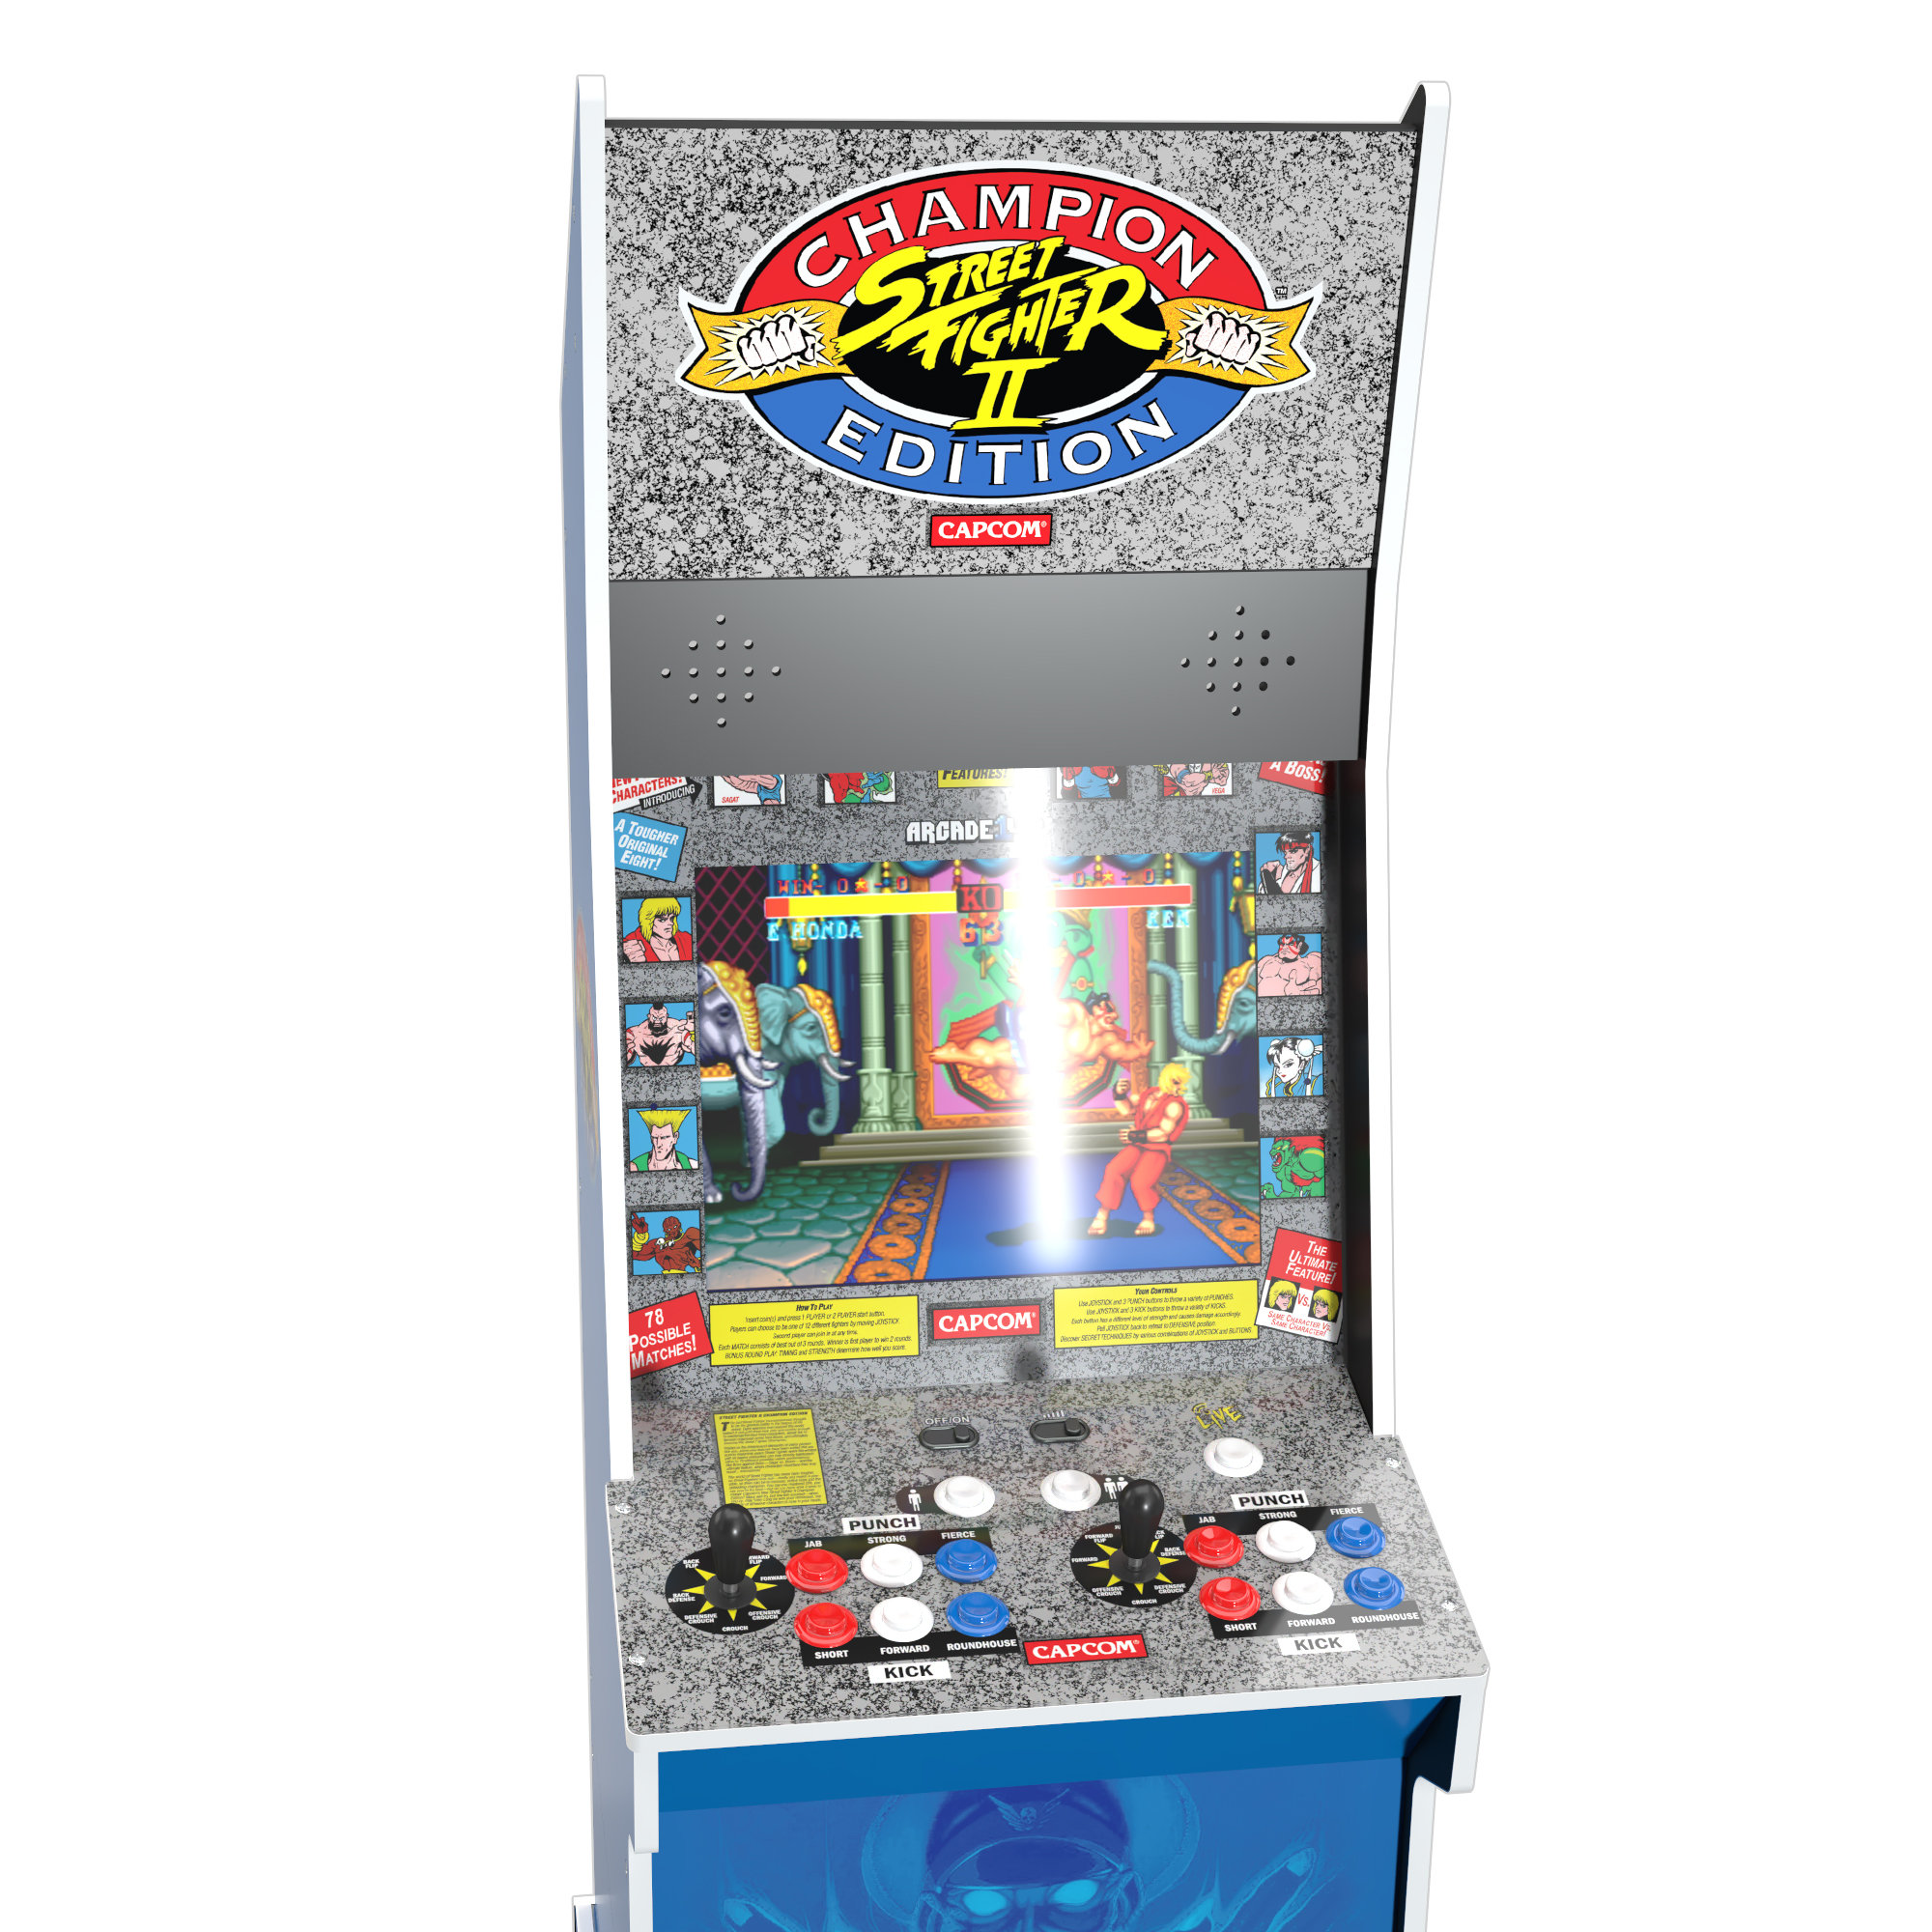 Flawless victory! - Our client - Punching Dragon Arcades